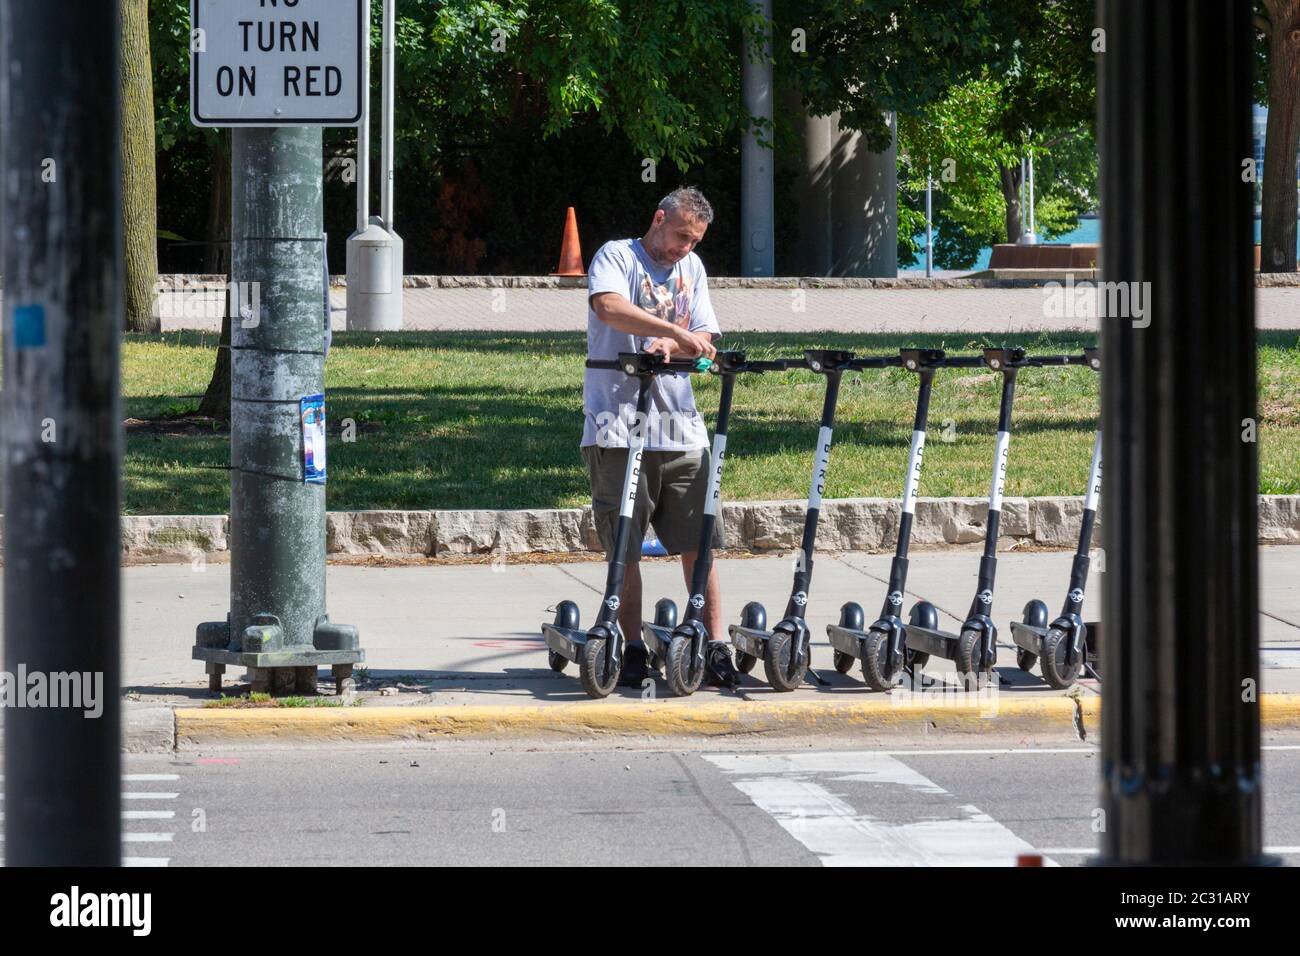 Detroit, Michigan - A worker uses sanitizing wipes to disinfect shared electric scooters parked on a city street during the coronavirus pandemic. Stock Photo